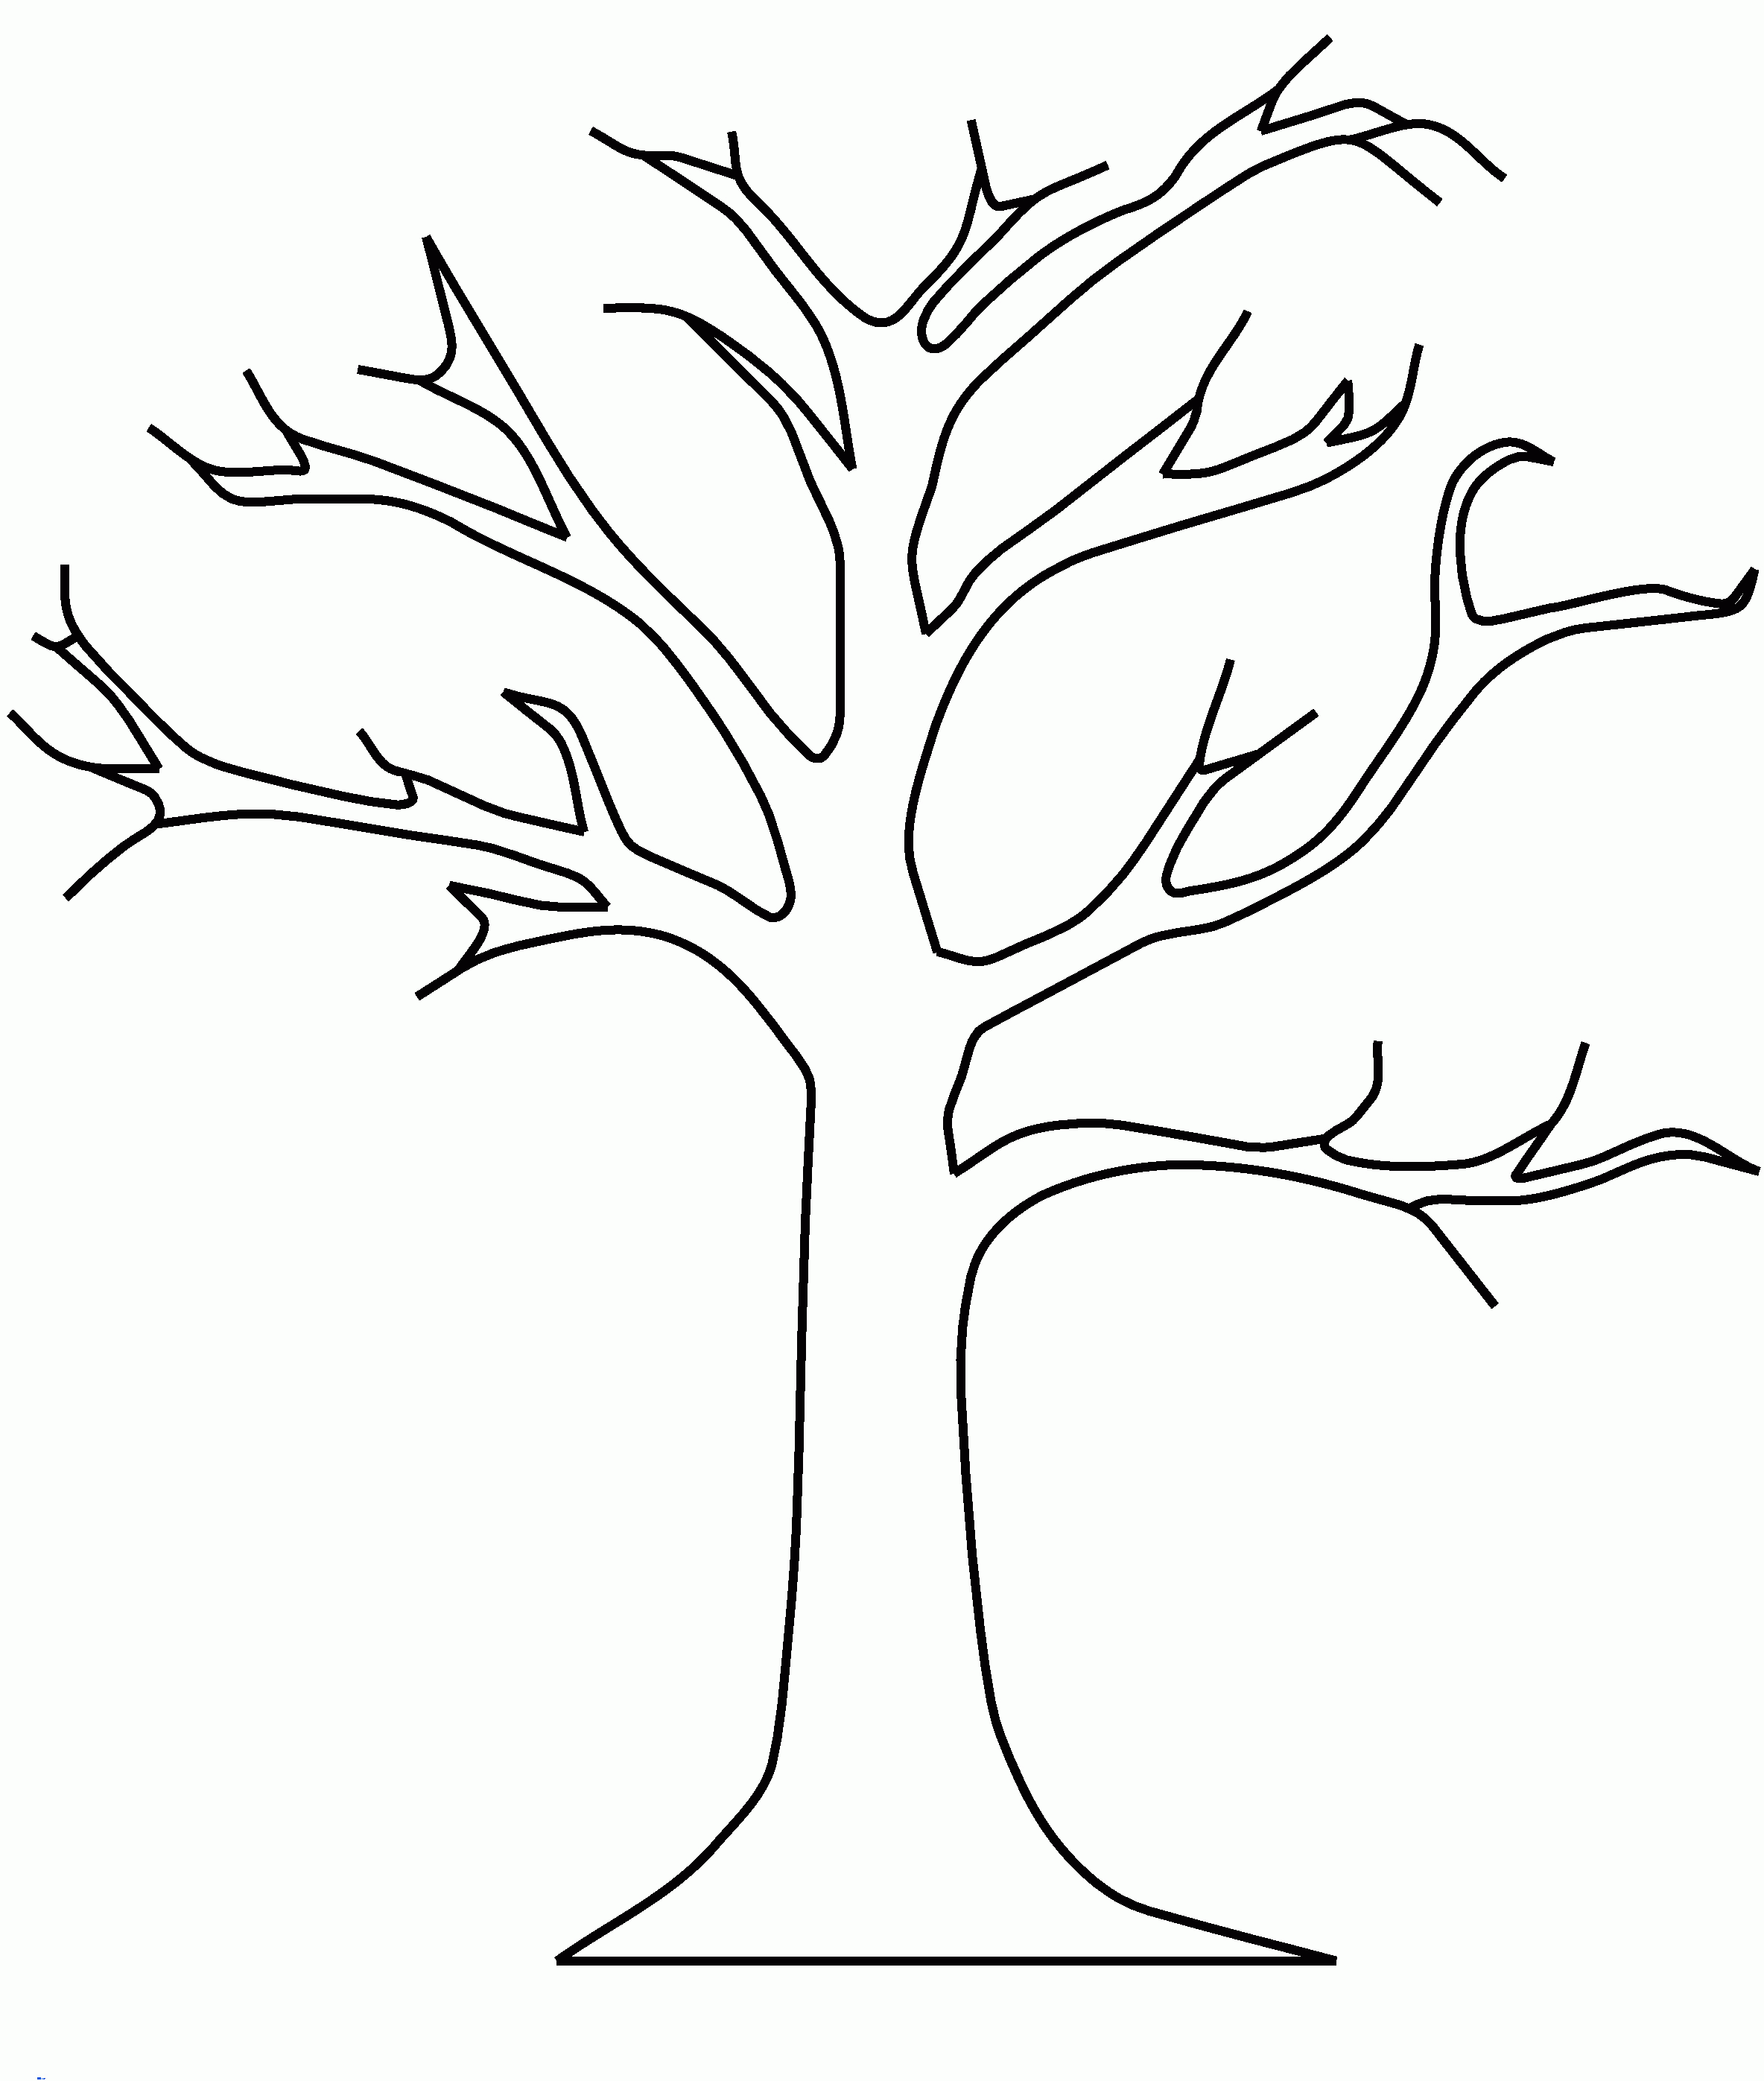 our family tree coloring page. tree coloring pages. leafless tree ...